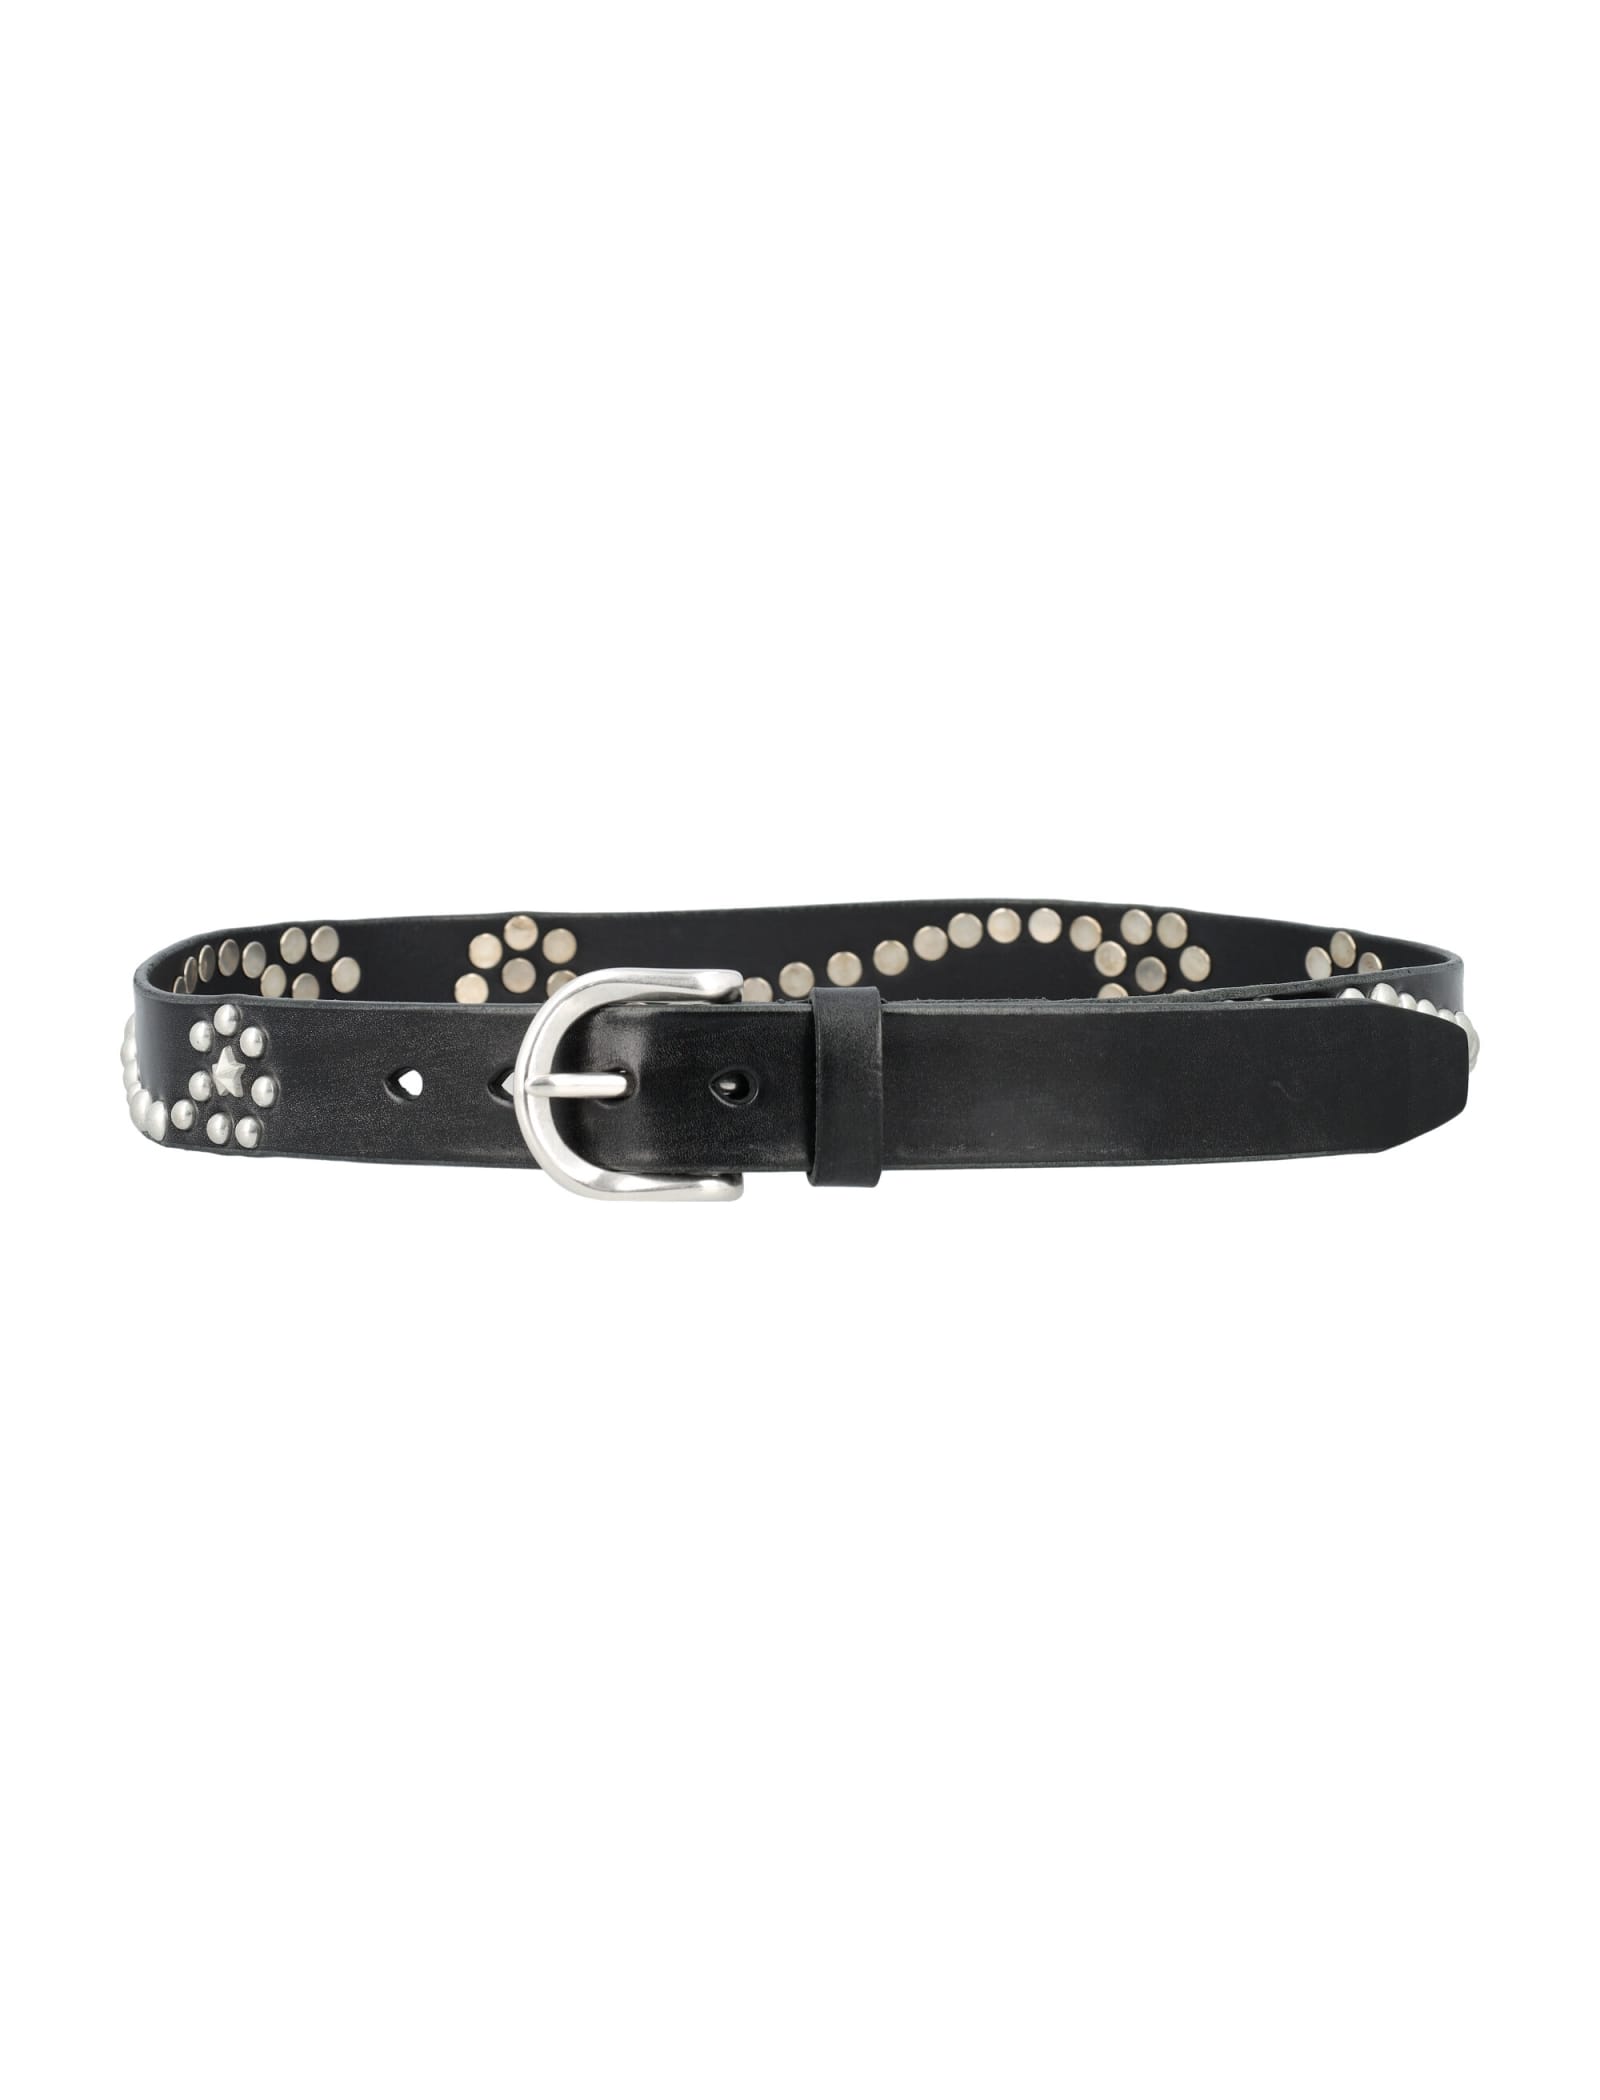 Shop Our Legacy Star Fall Belt In Black Bridle